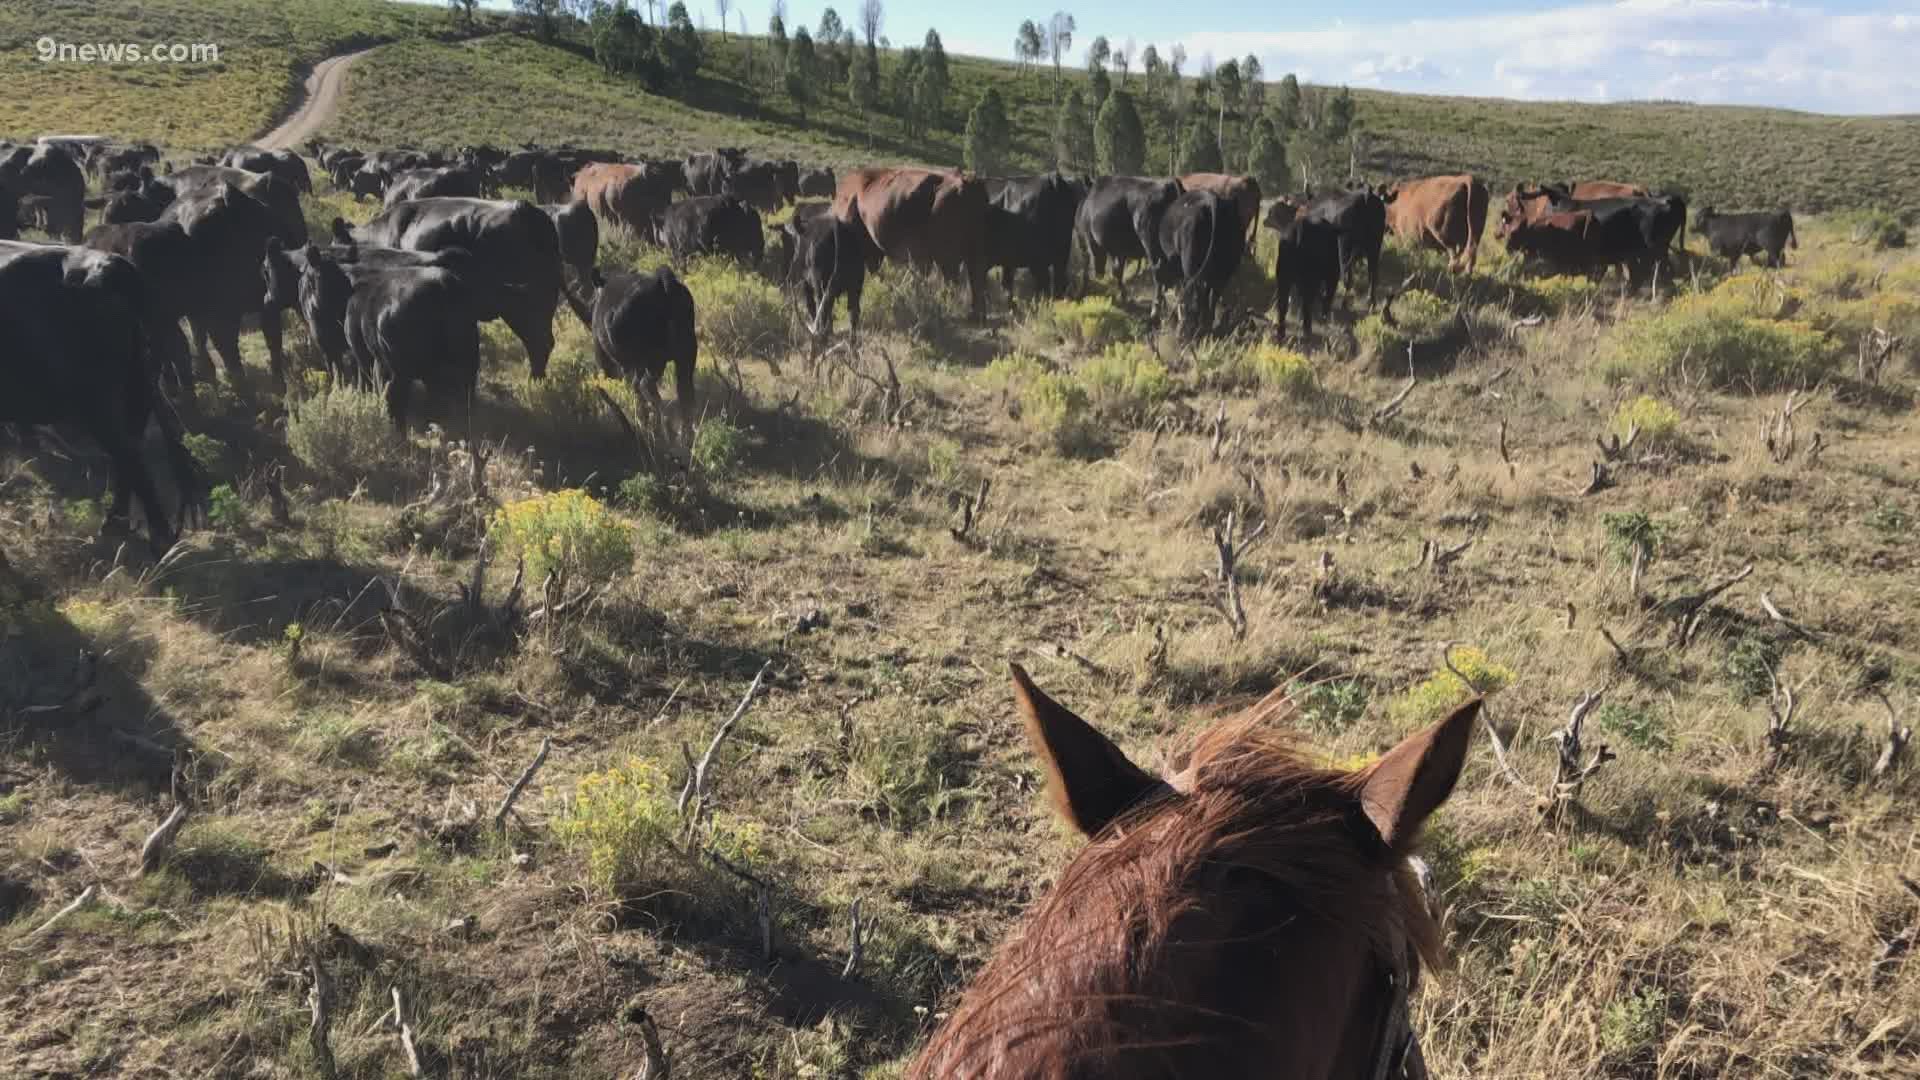 Many of their cattle graze on private or BLM lands that burned in the fire. They've spent days wrangling their cows and getting them away from the fire and smoke.